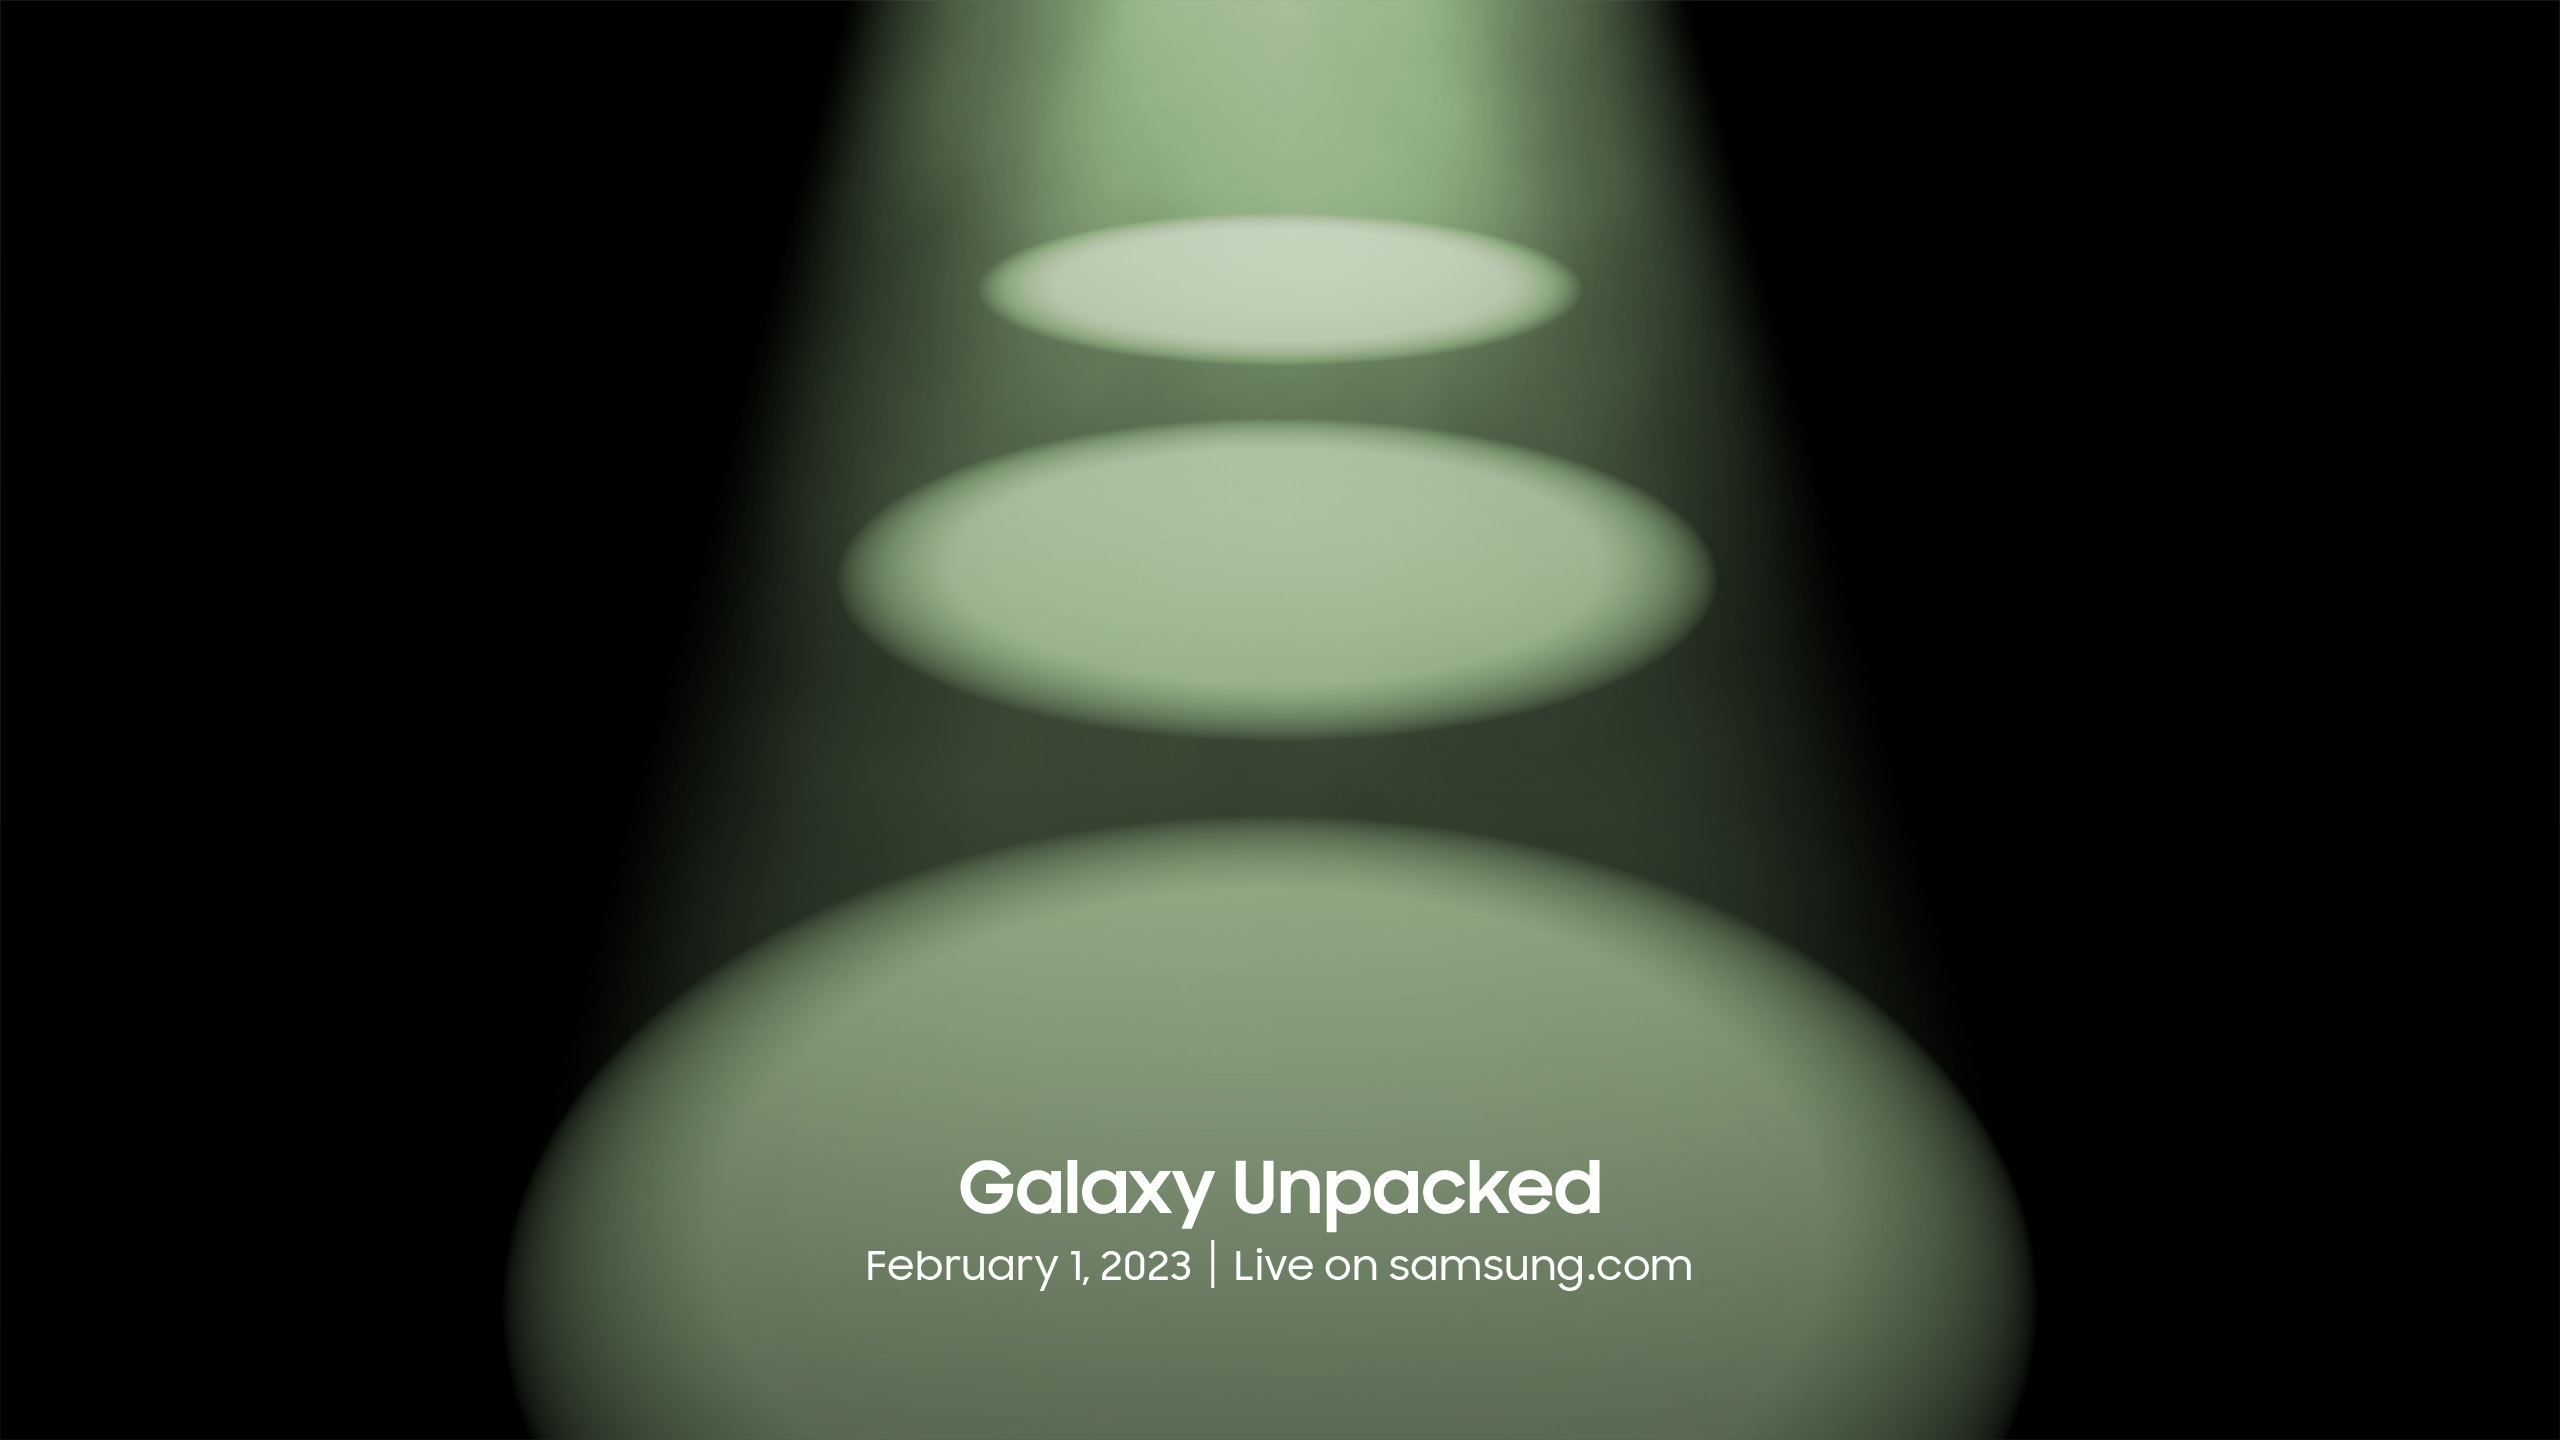 It's official: Samsung Galaxy S23 Unpacked event is happening on February 1